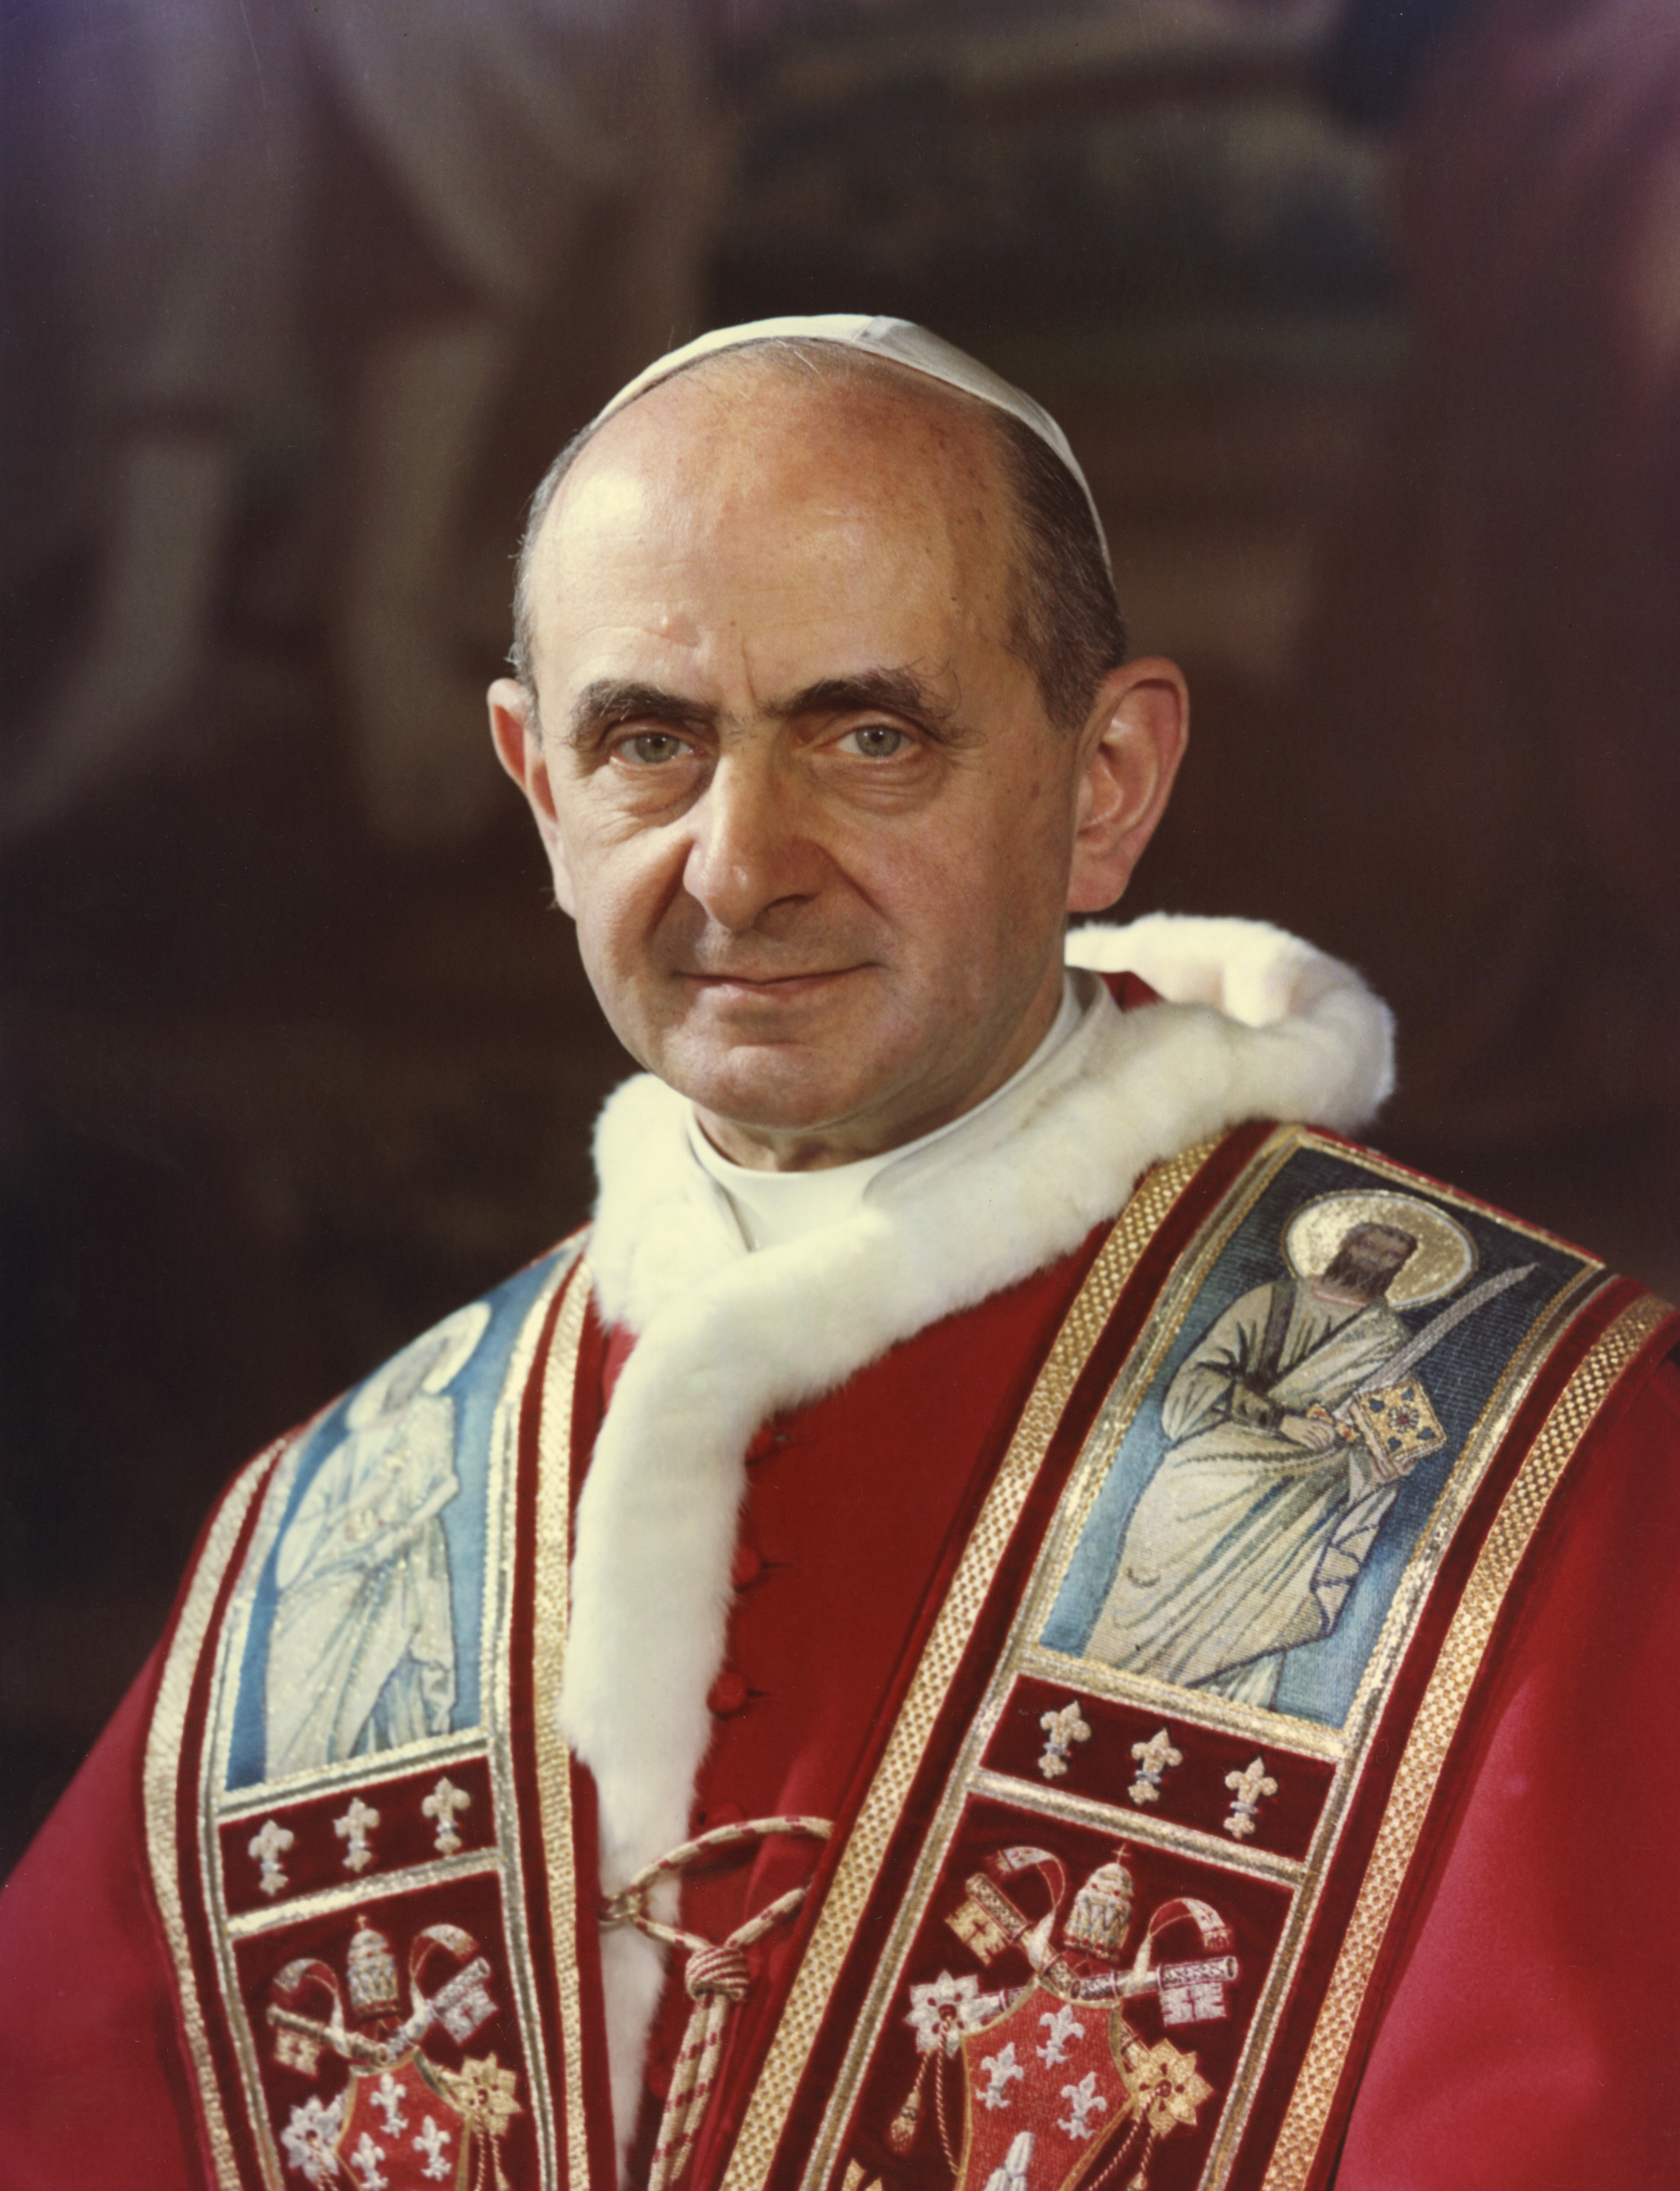 Pope prays Blessed Paul VI will intercede for 'church he loved so much'